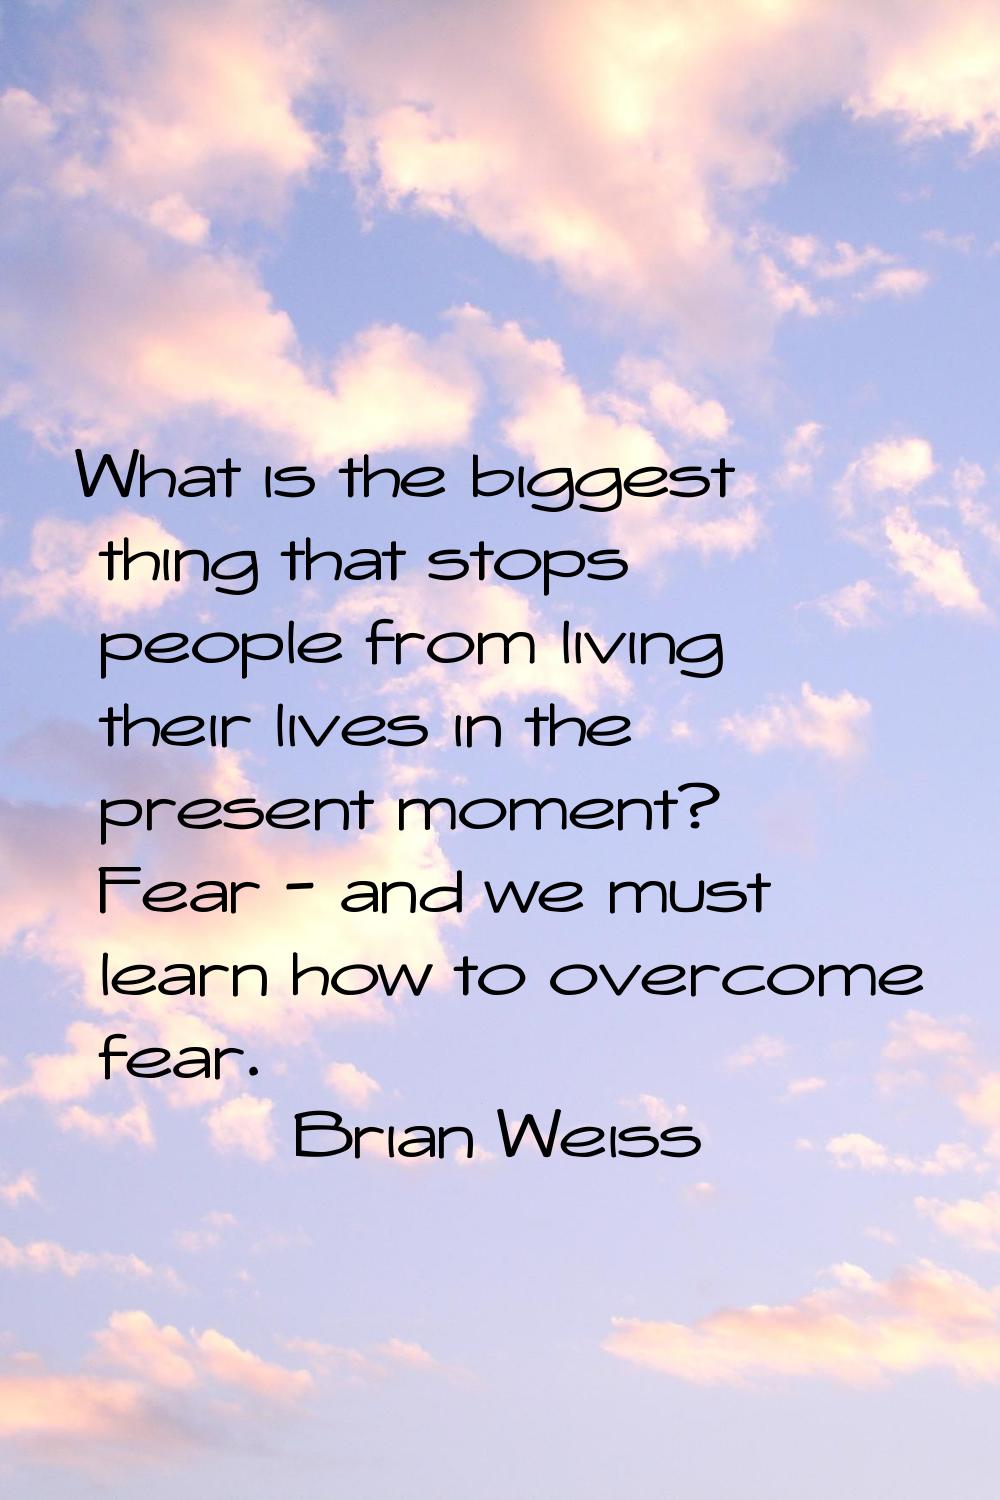 What is the biggest thing that stops people from living their lives in the present moment? Fear - a